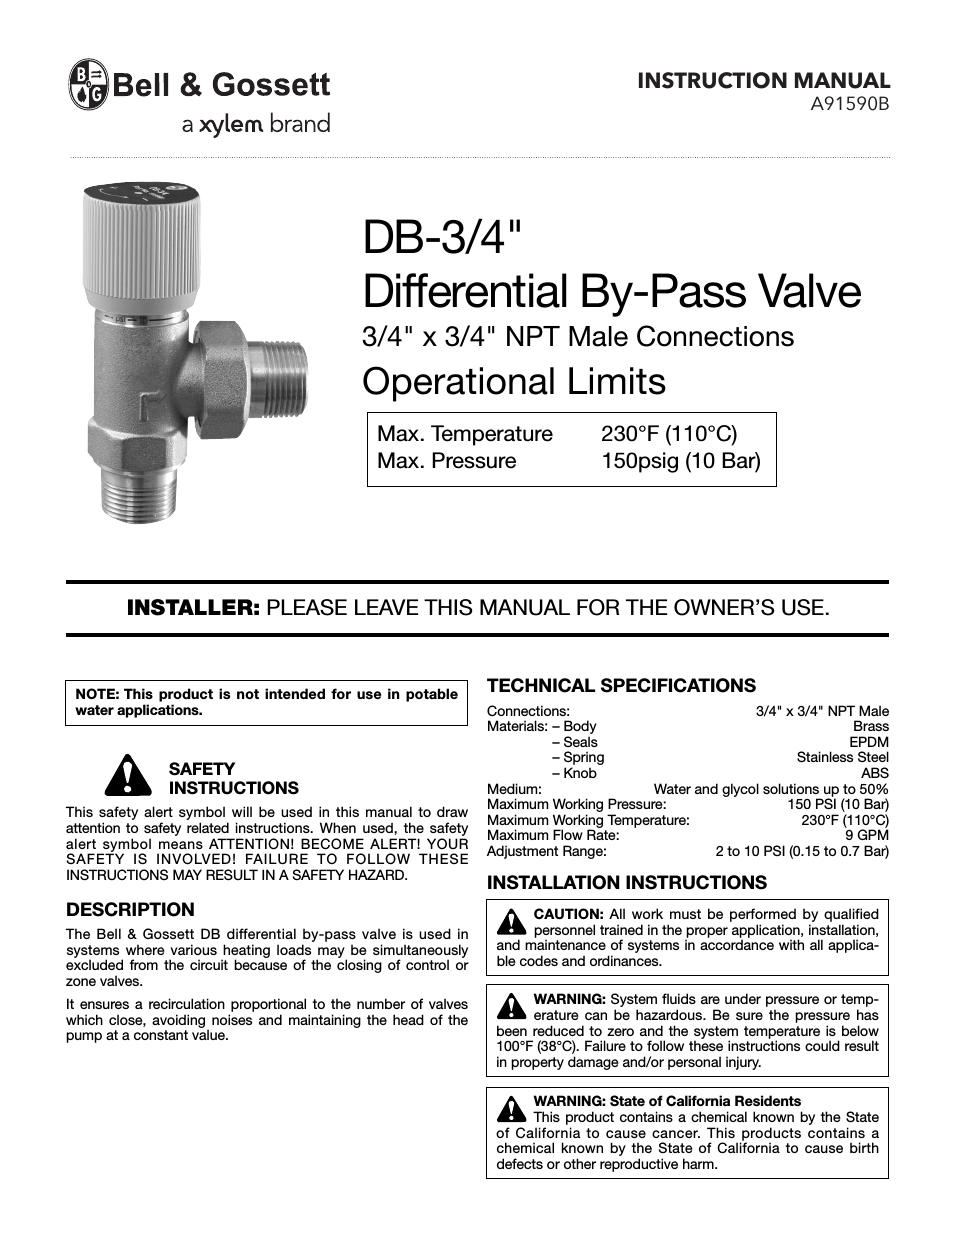 A91590B DB-3/4″ Differential By-Pass Valve 3/4″ x 3/4″ NPT Male Connections Operational Limits